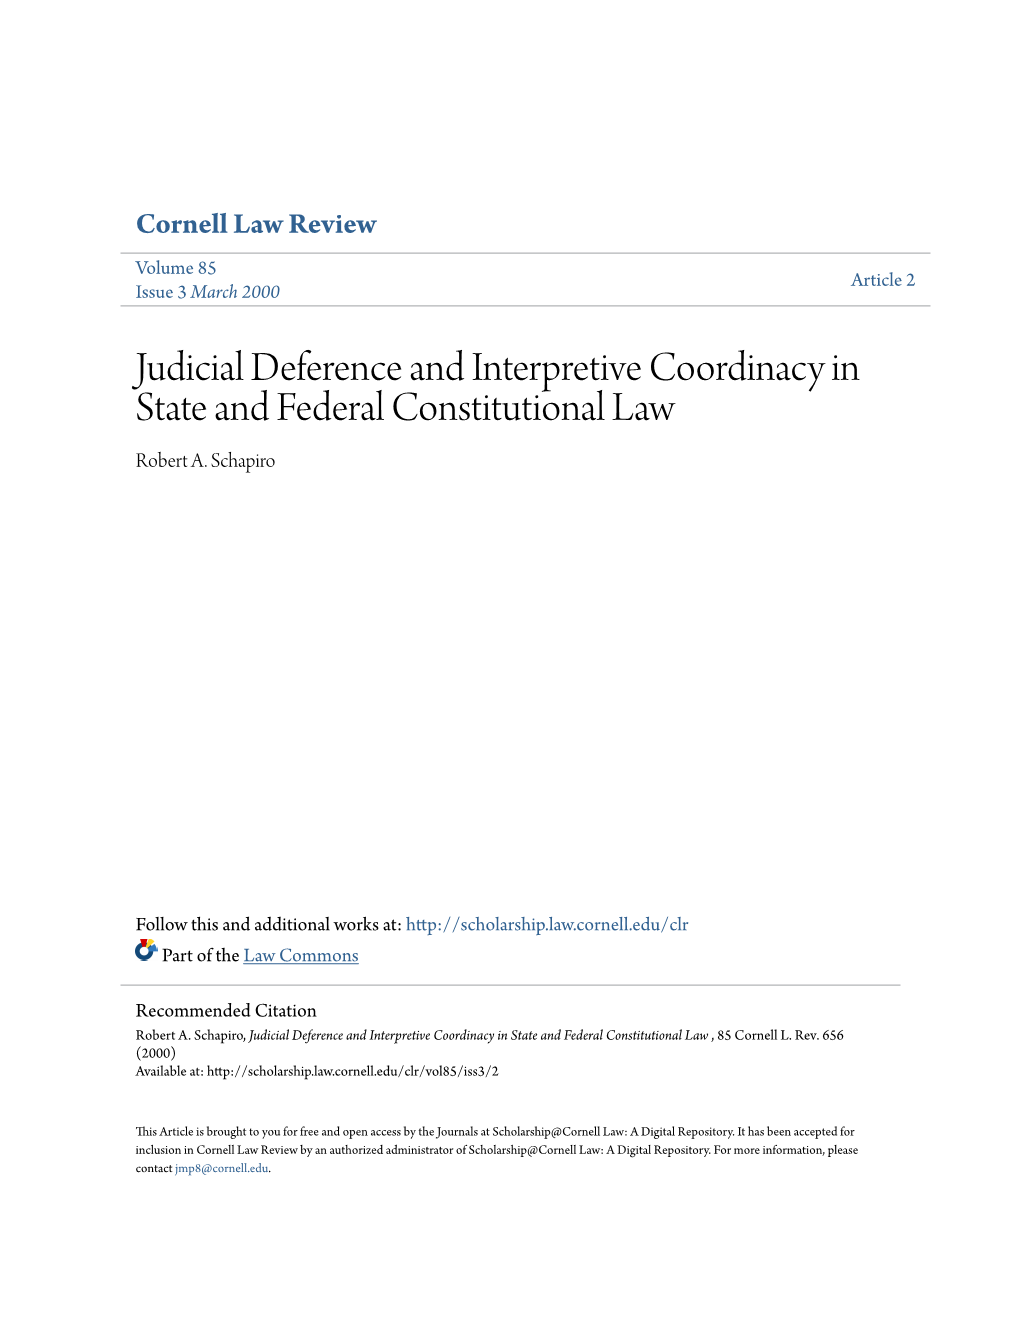 Judicial Deference and Interpretive Coordinacy in State and Federal Constitutional Law Robert A